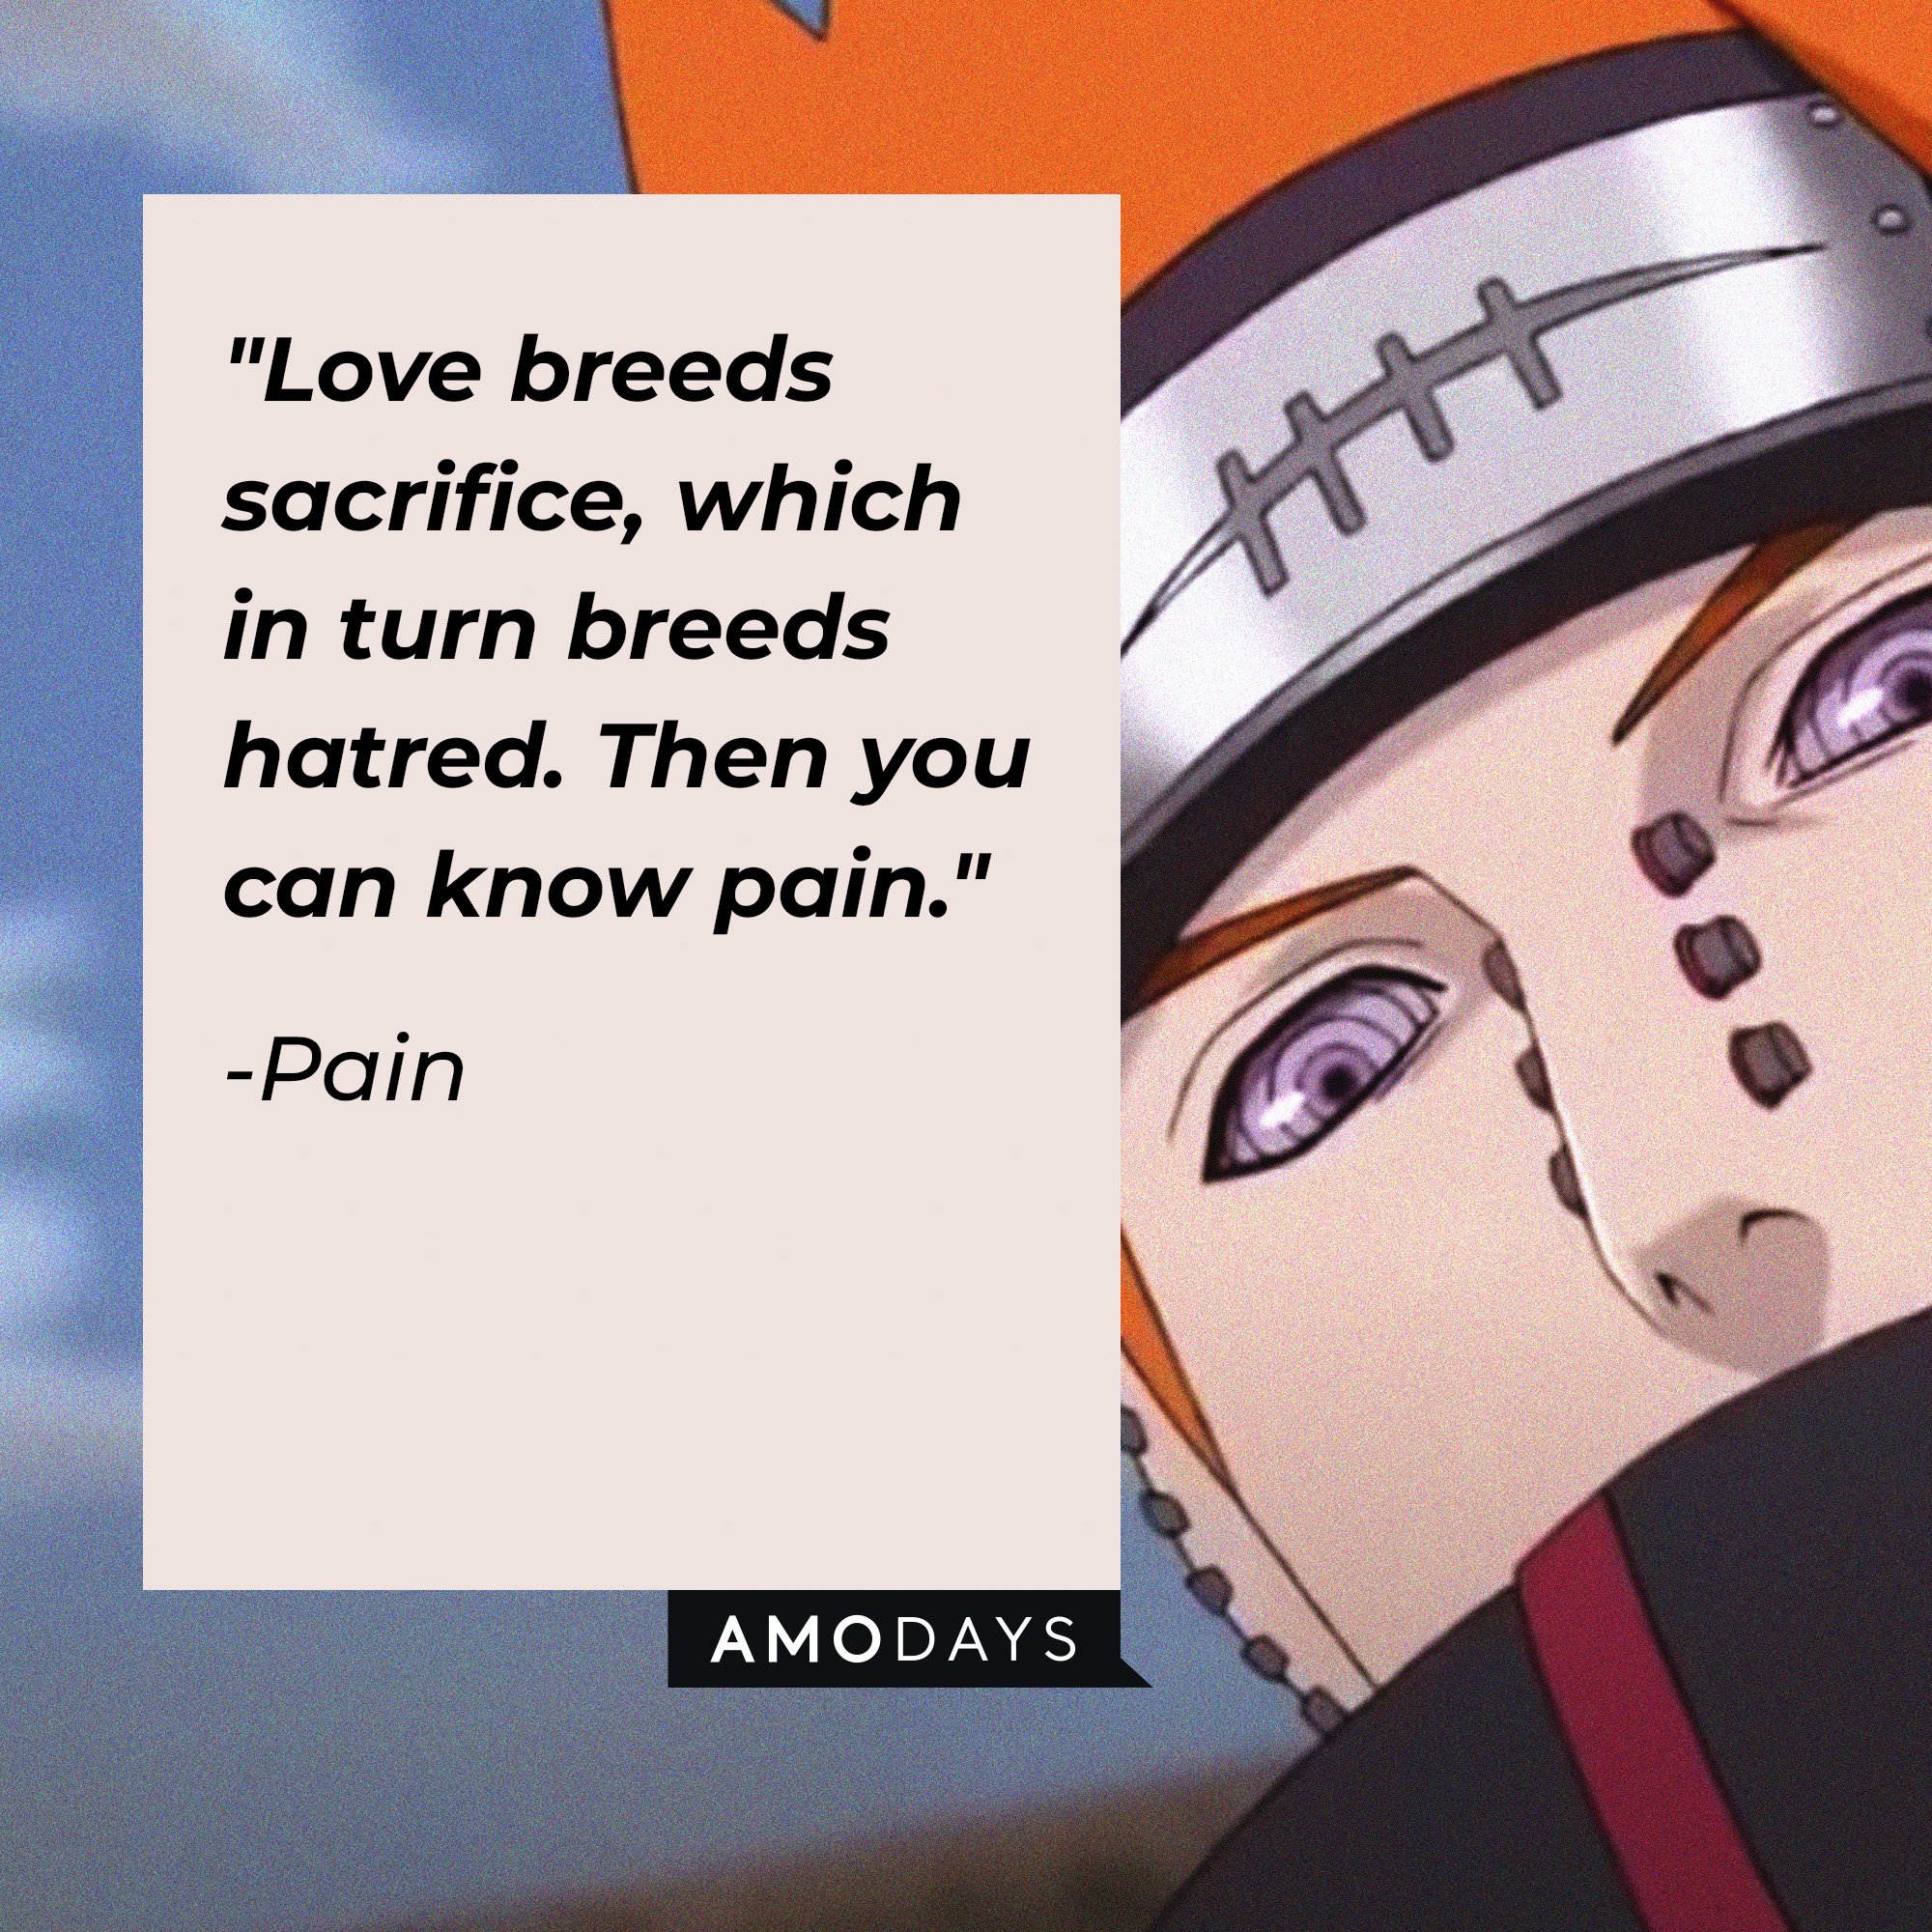  Pain 's quote: "Love breeds sacrifice, which in turn breeds hatred. Then you can know pain." | Image: AmoDays